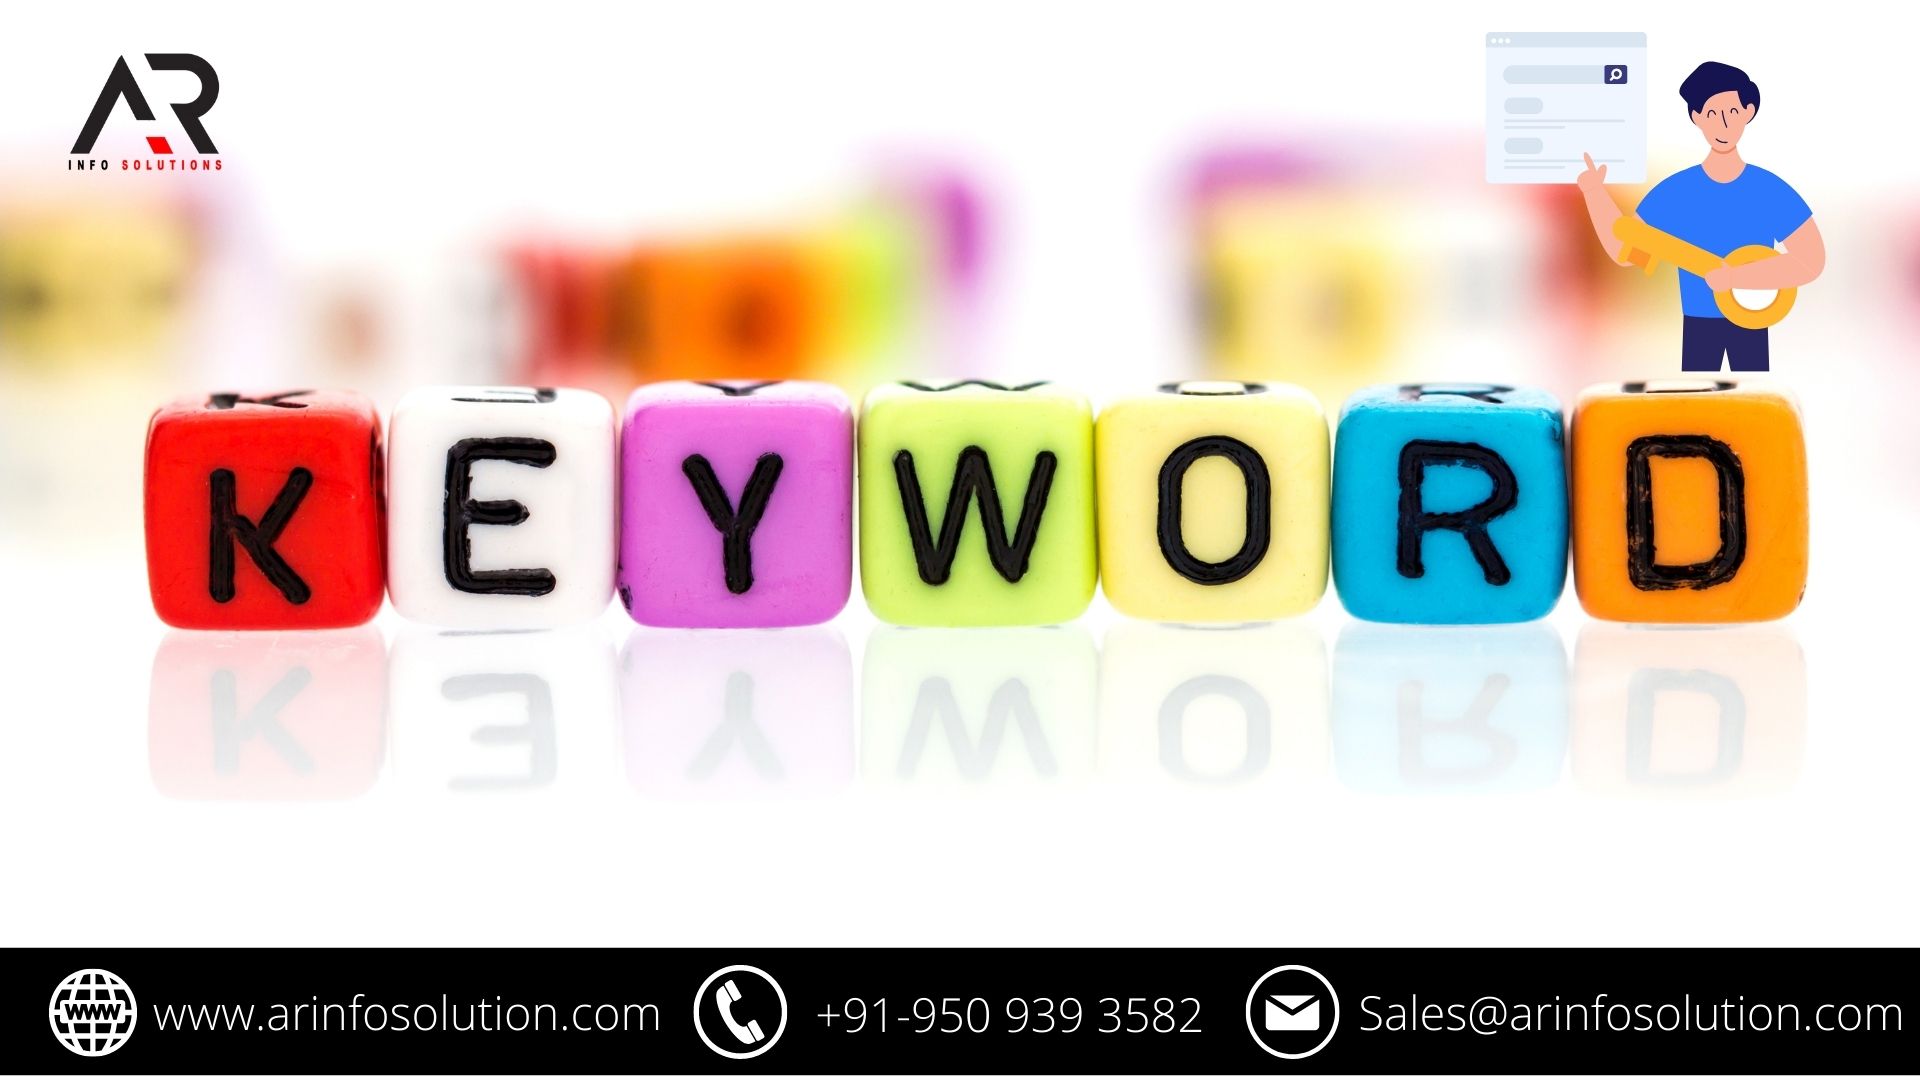 RIGHT WAY TO SELECT THE KEYWORD DURING KEYWORD RESEARCH IN SEO?